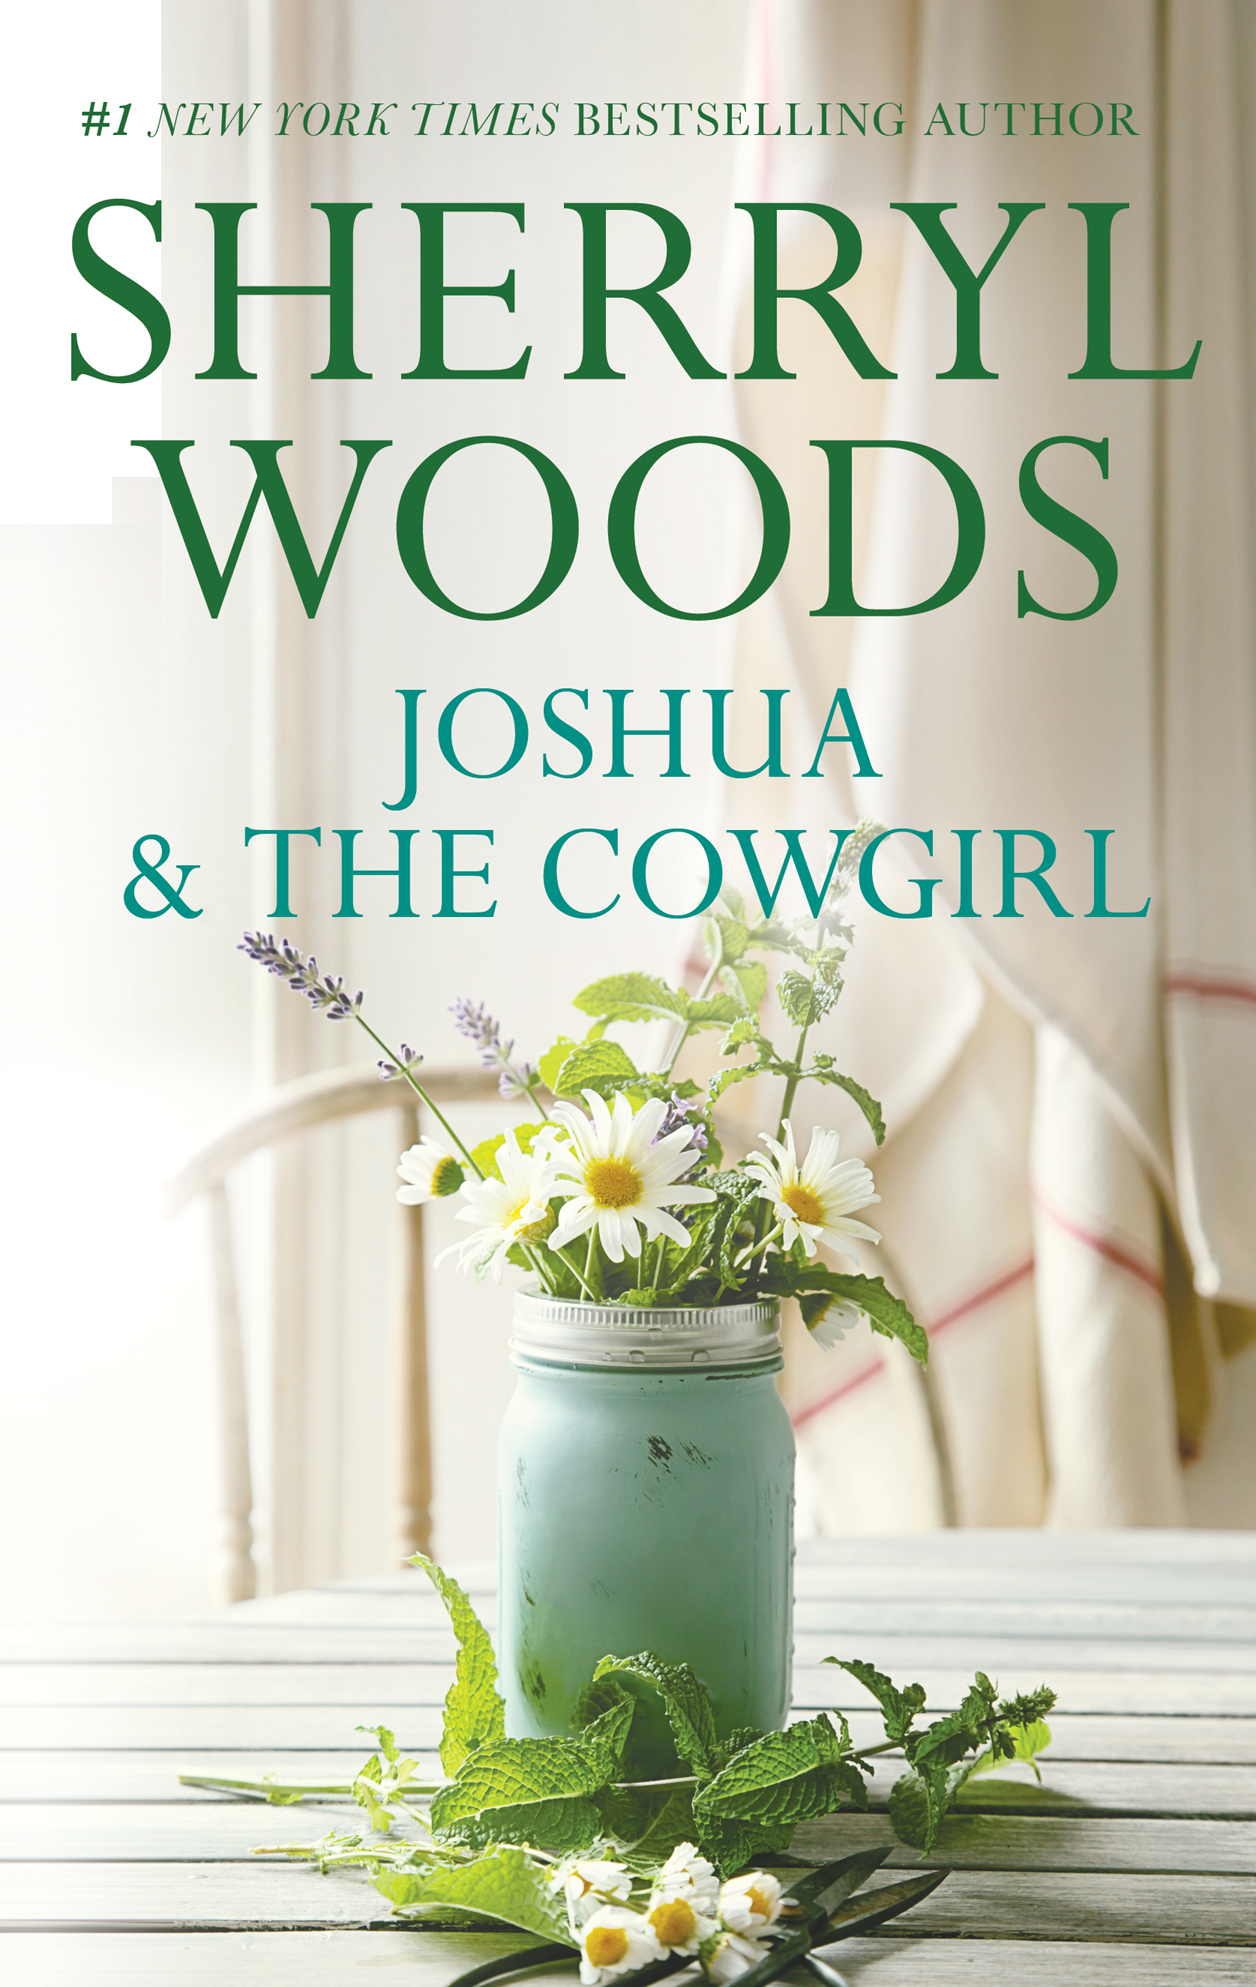 Joshua and the Cowgirl (1991) by Sherryl Woods